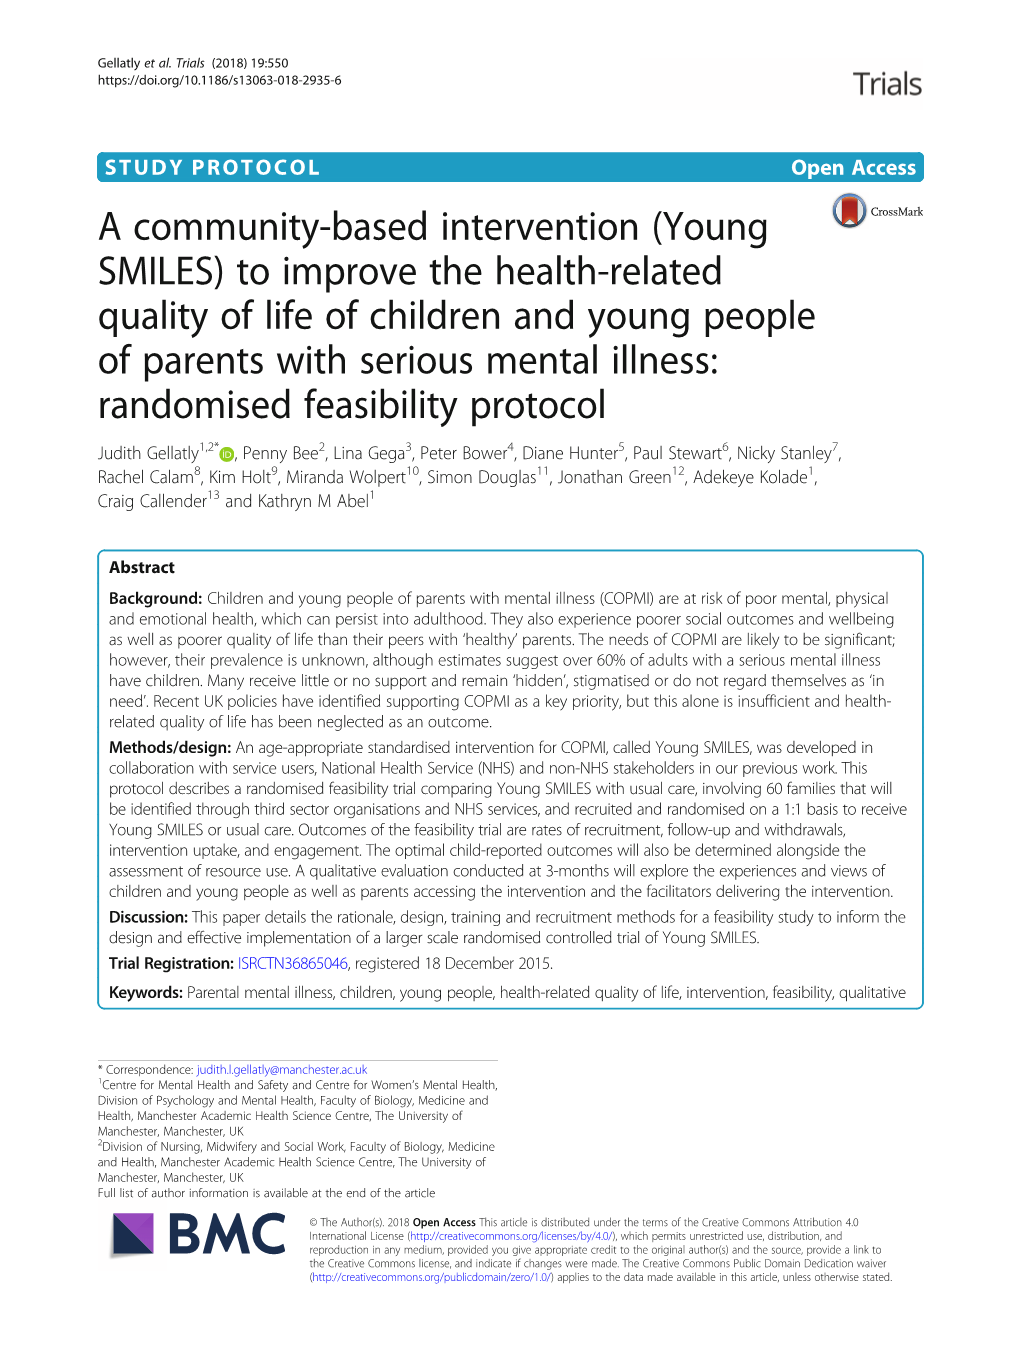 A Community-Based Intervention (Young SMILES) to Improve The